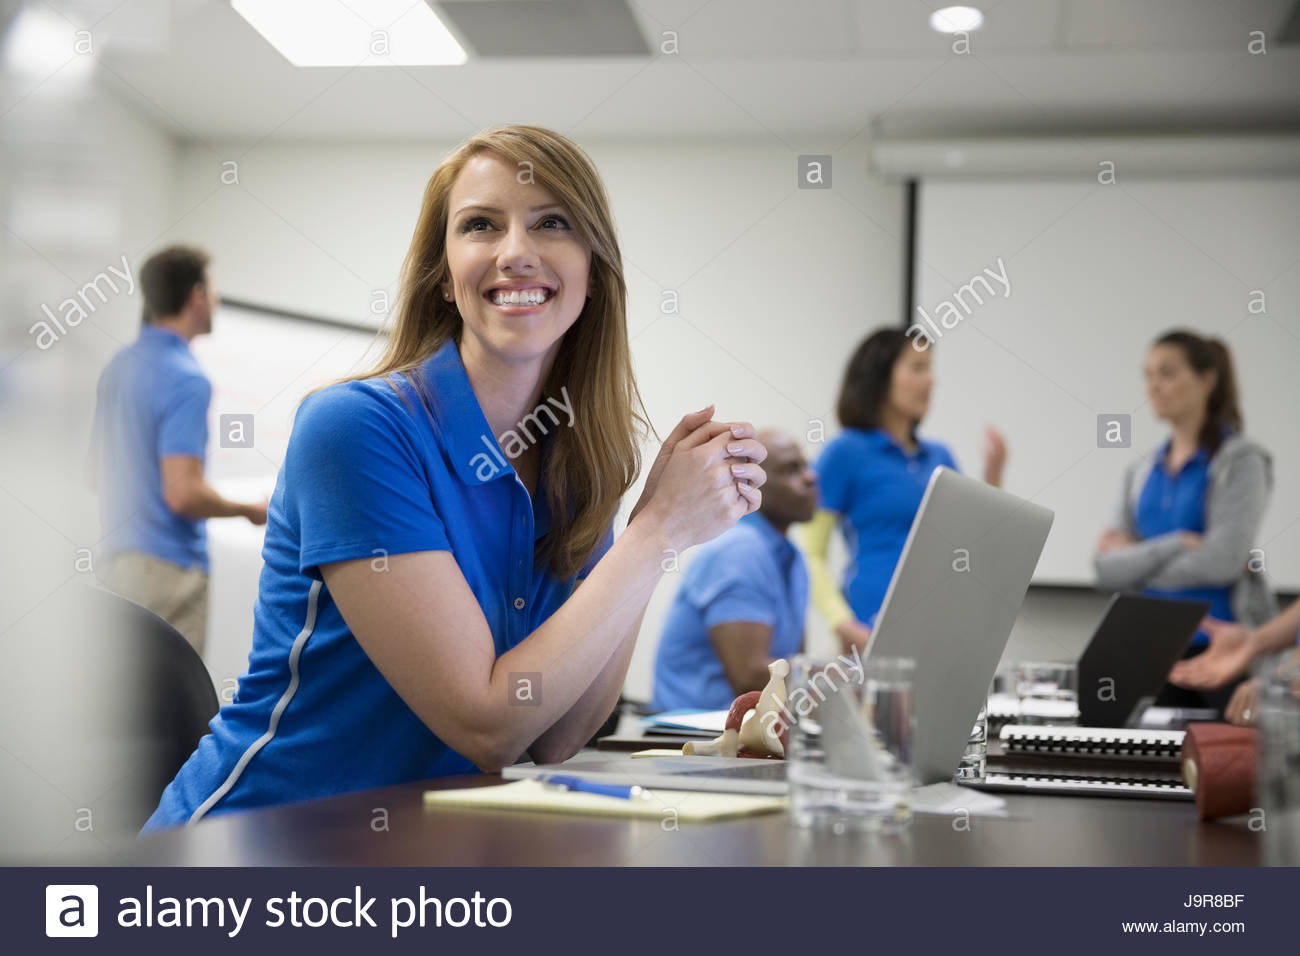 Smiling focused female physiotherapist with laptop training in conference room meeting Stock Photo